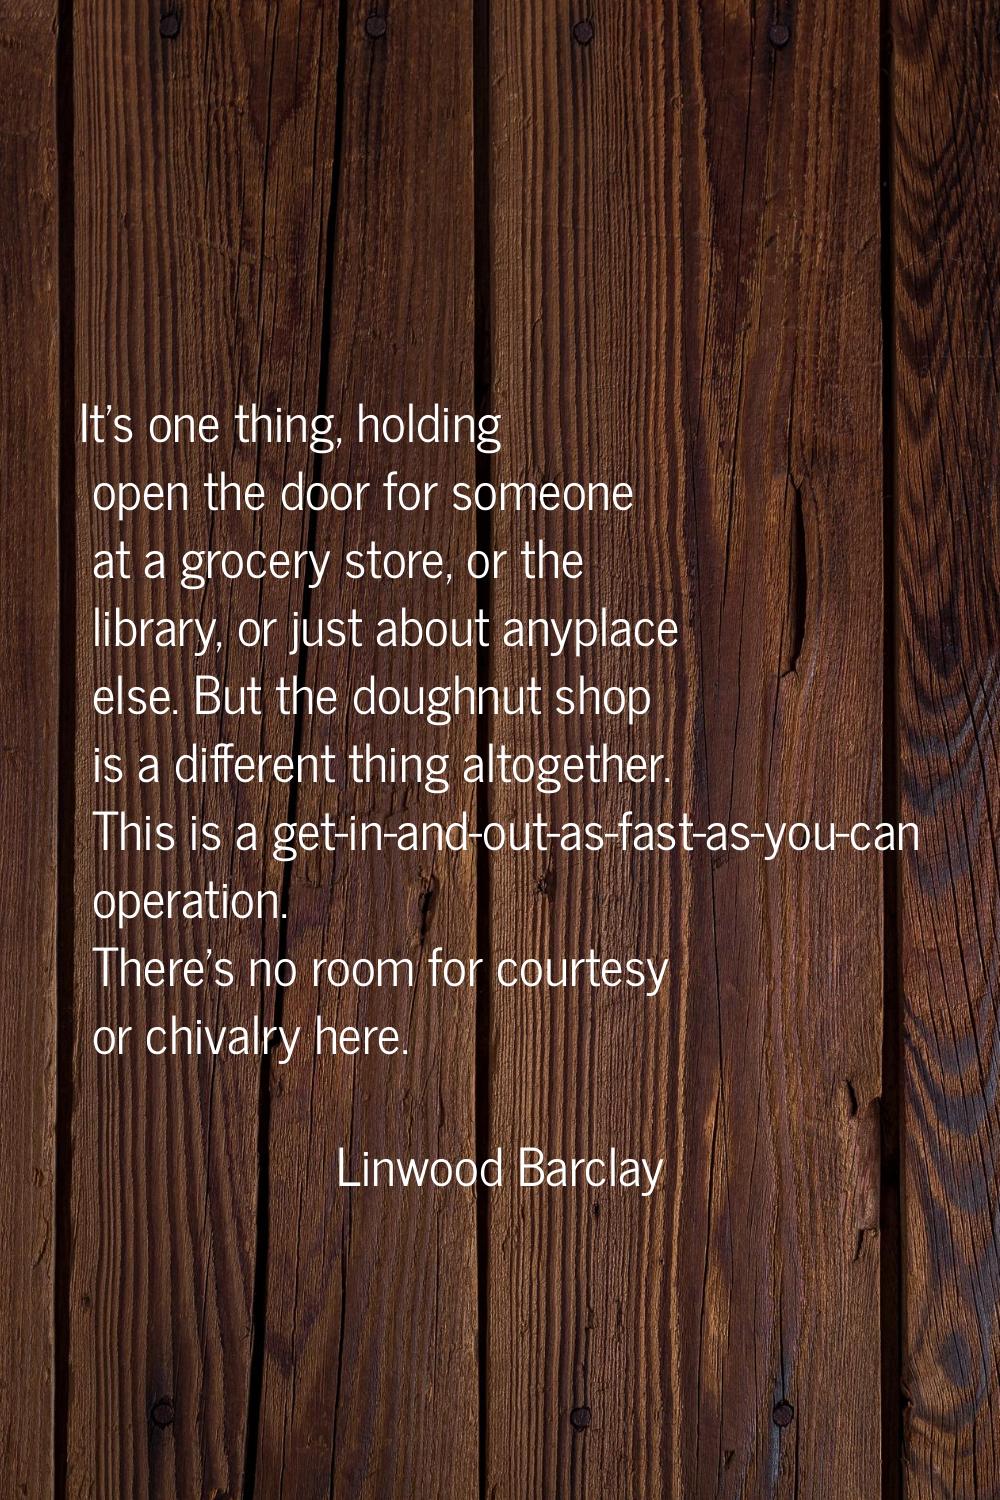 It's one thing, holding open the door for someone at a grocery store, or the library, or just about